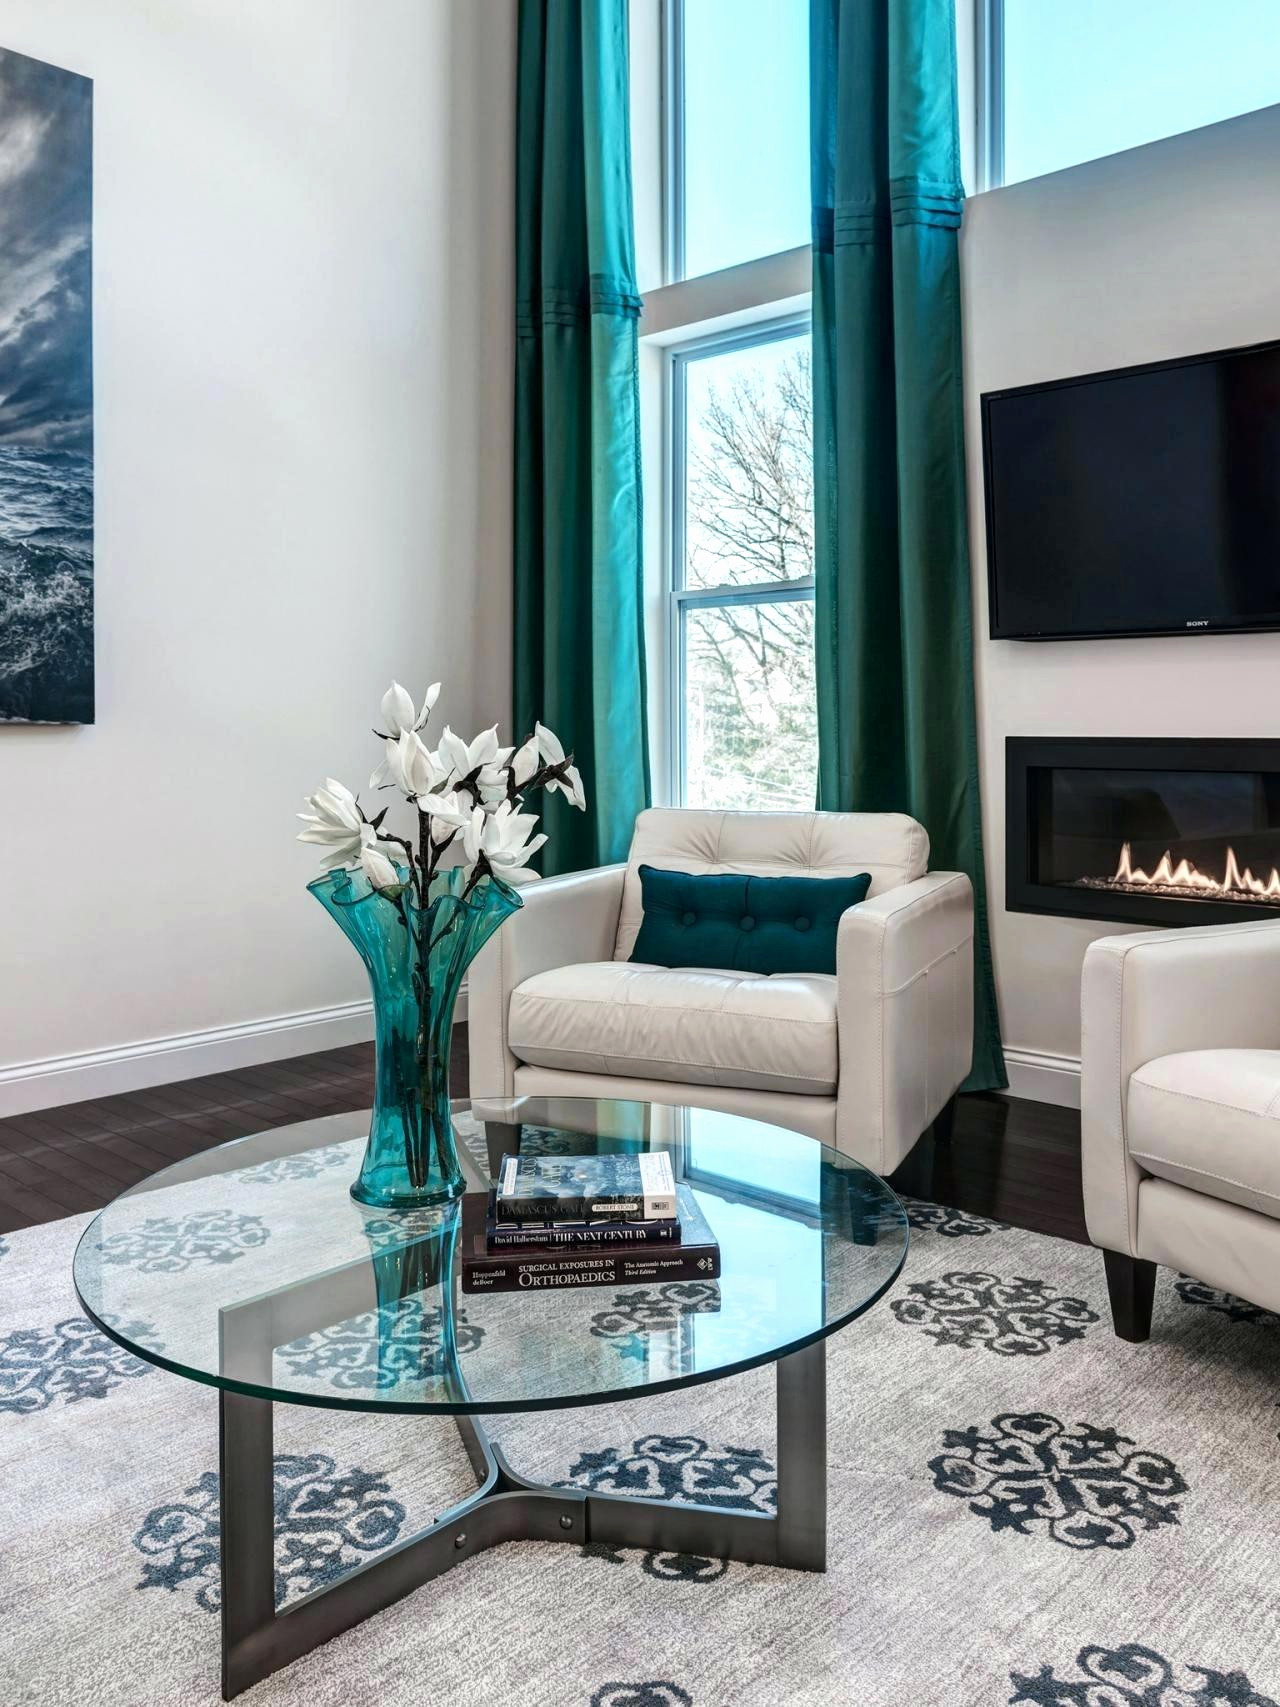 Turquoise Rug Living Room
 Living Room Layout And Decor Turquoise Rug Navy Blue Area